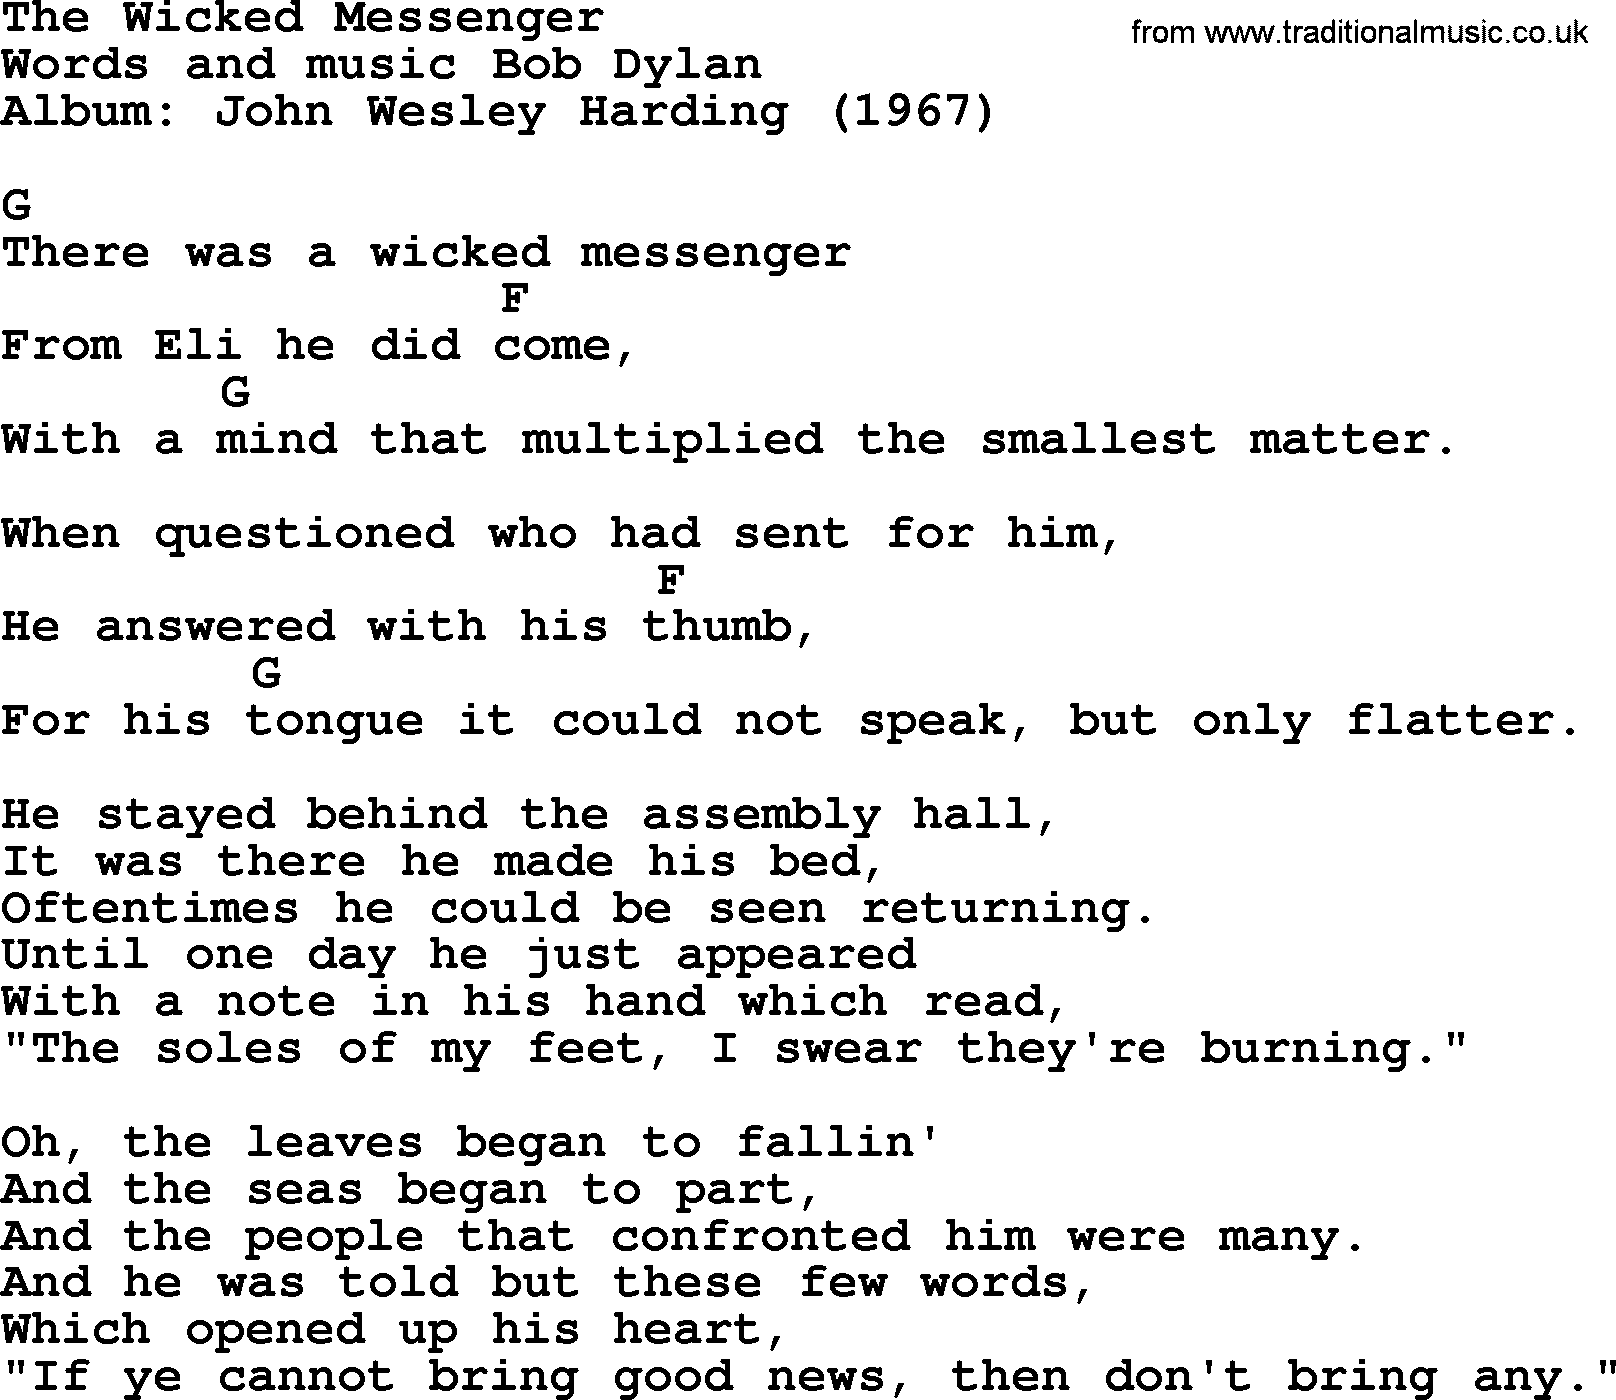 Bob Dylan song, lyrics with chords - The Wicked Messenger